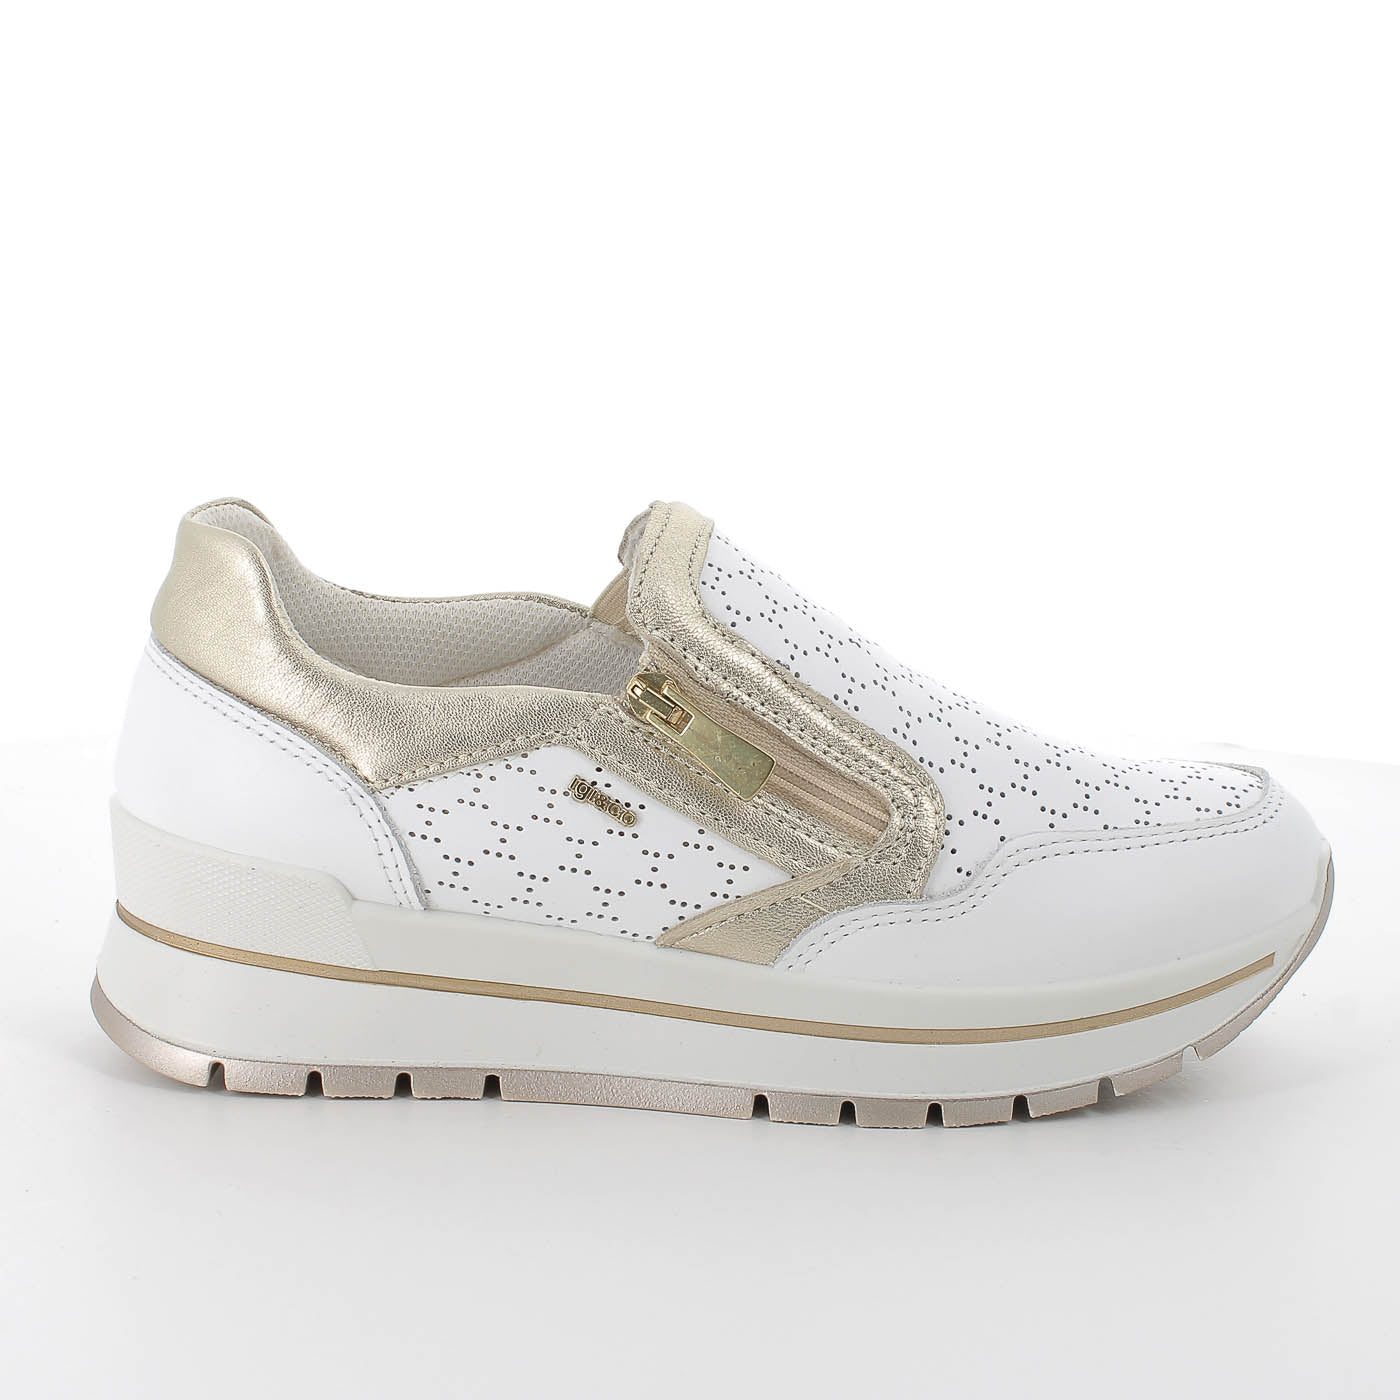  Front view of IGI & Co Wide Fit Zip Runner Sneakers with gold accents.